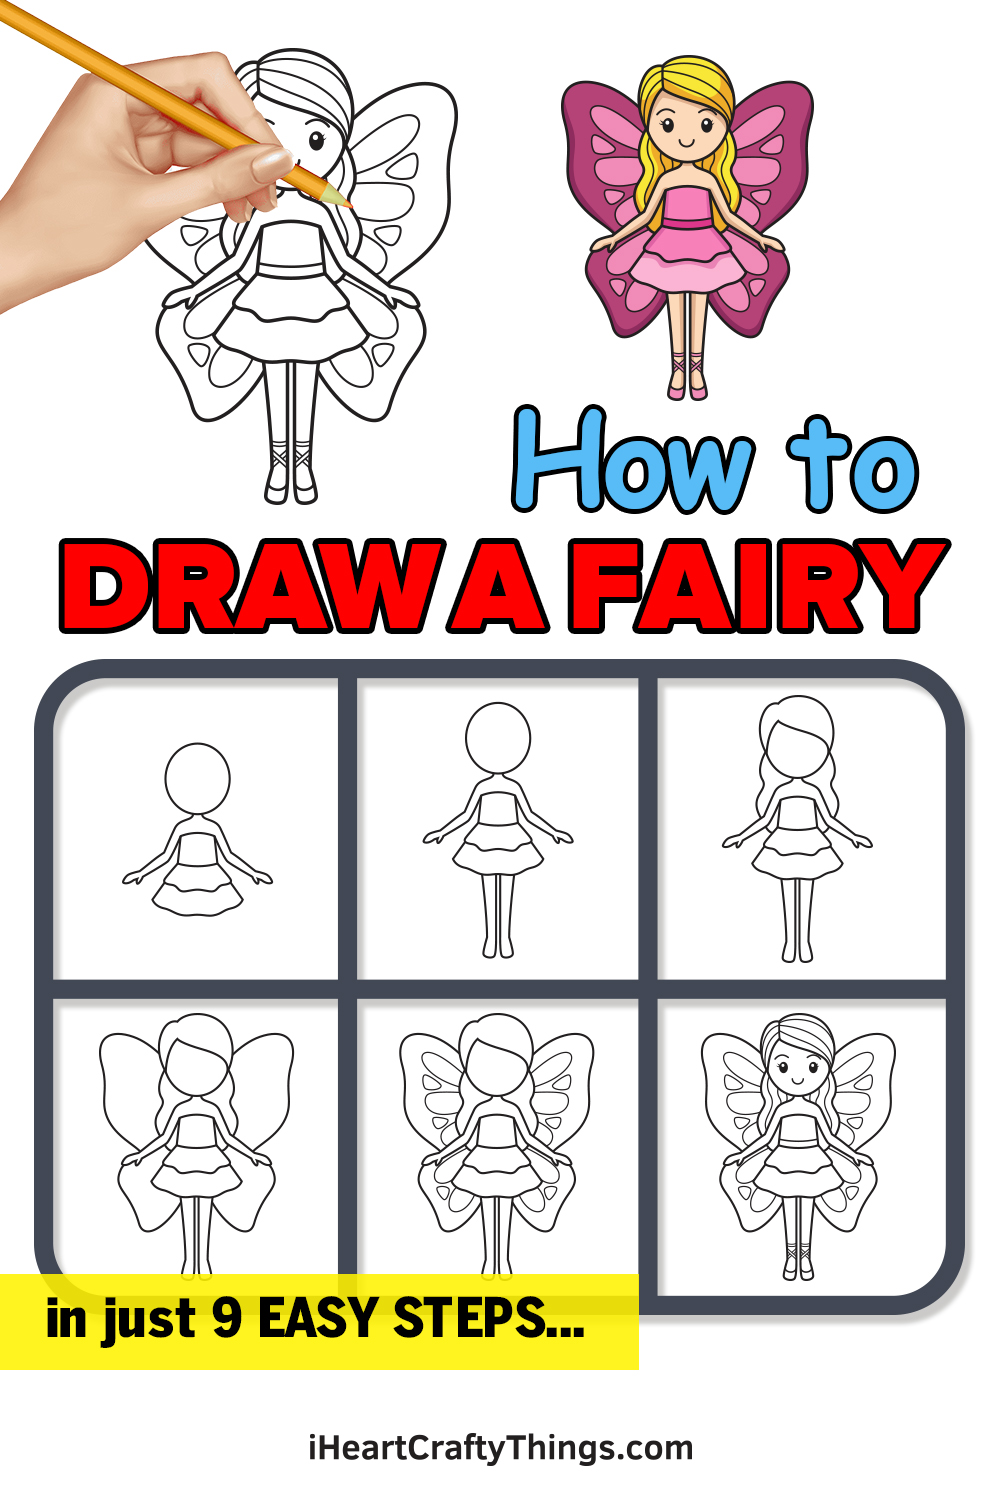 How to draw a fairy in 9 easy steps